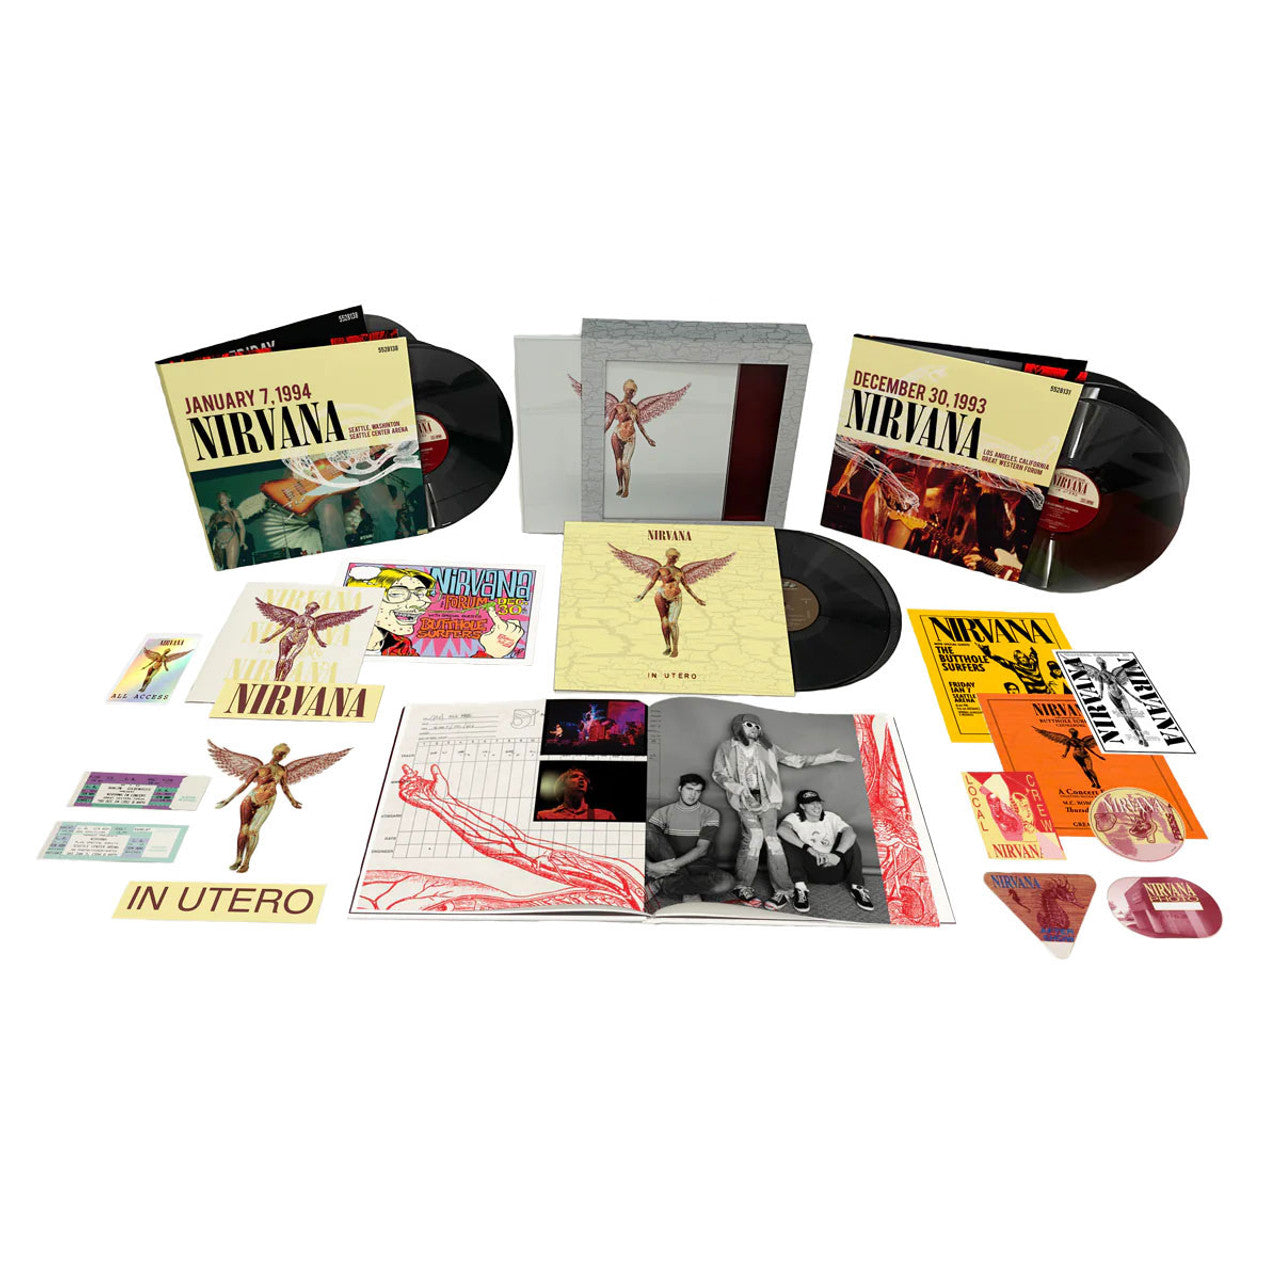 Nirvana - In Utero [8LP Boxset] (30th Anniversary, 180 Gram, Super Deluxe Edition, 53 unreleased tracks, 48-pg book, poster litho, 2 ticket stubs, 3 gig flyers, tour laminate, backstage passes) (limited)